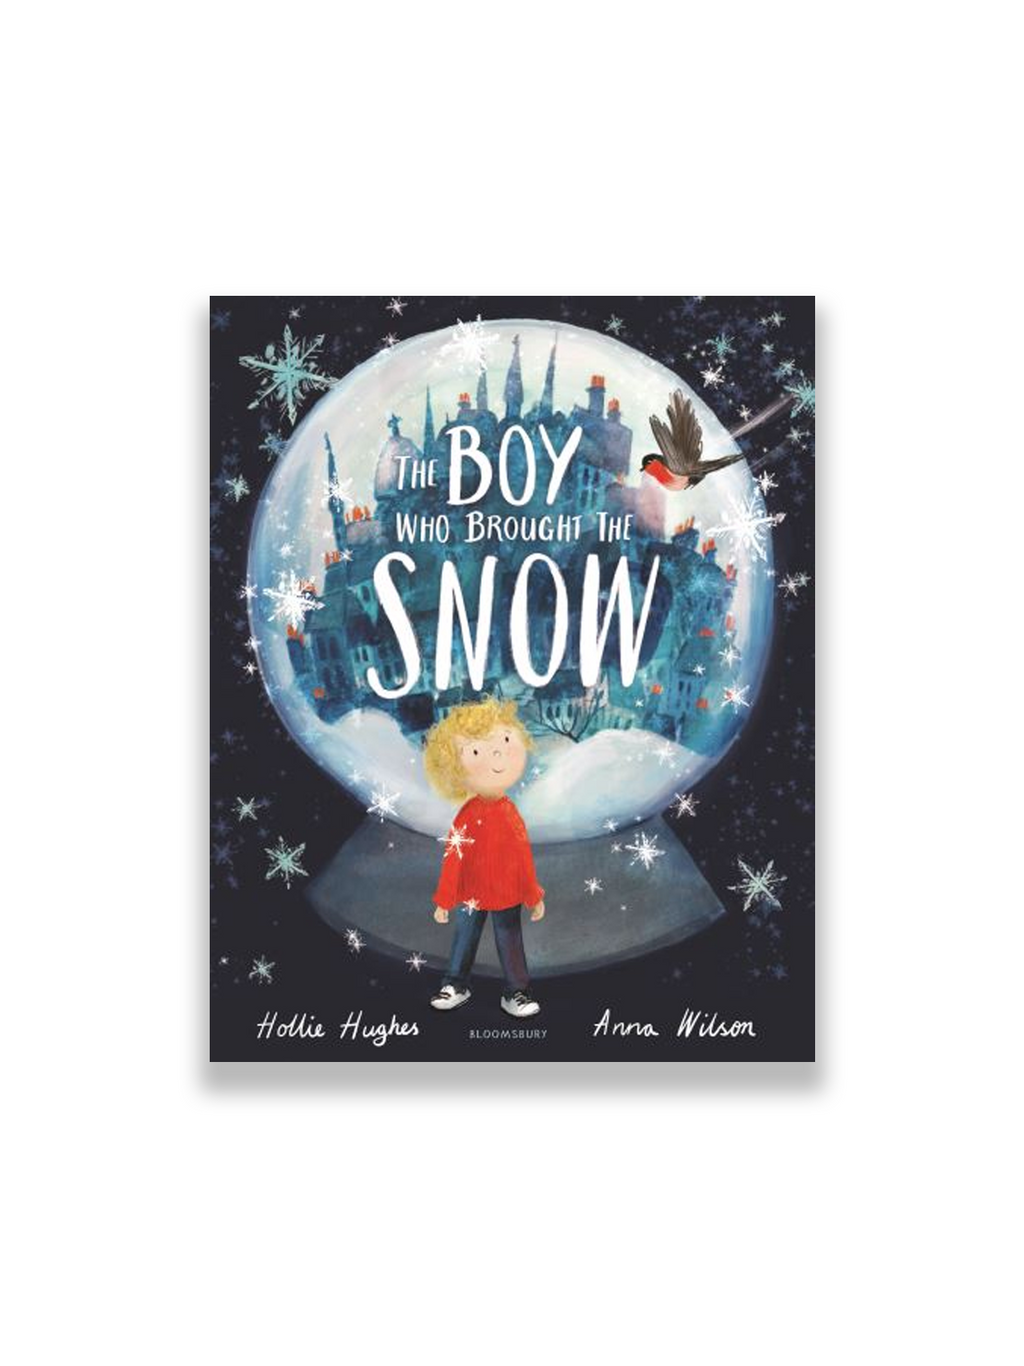 The Boy Who Brought the Snow